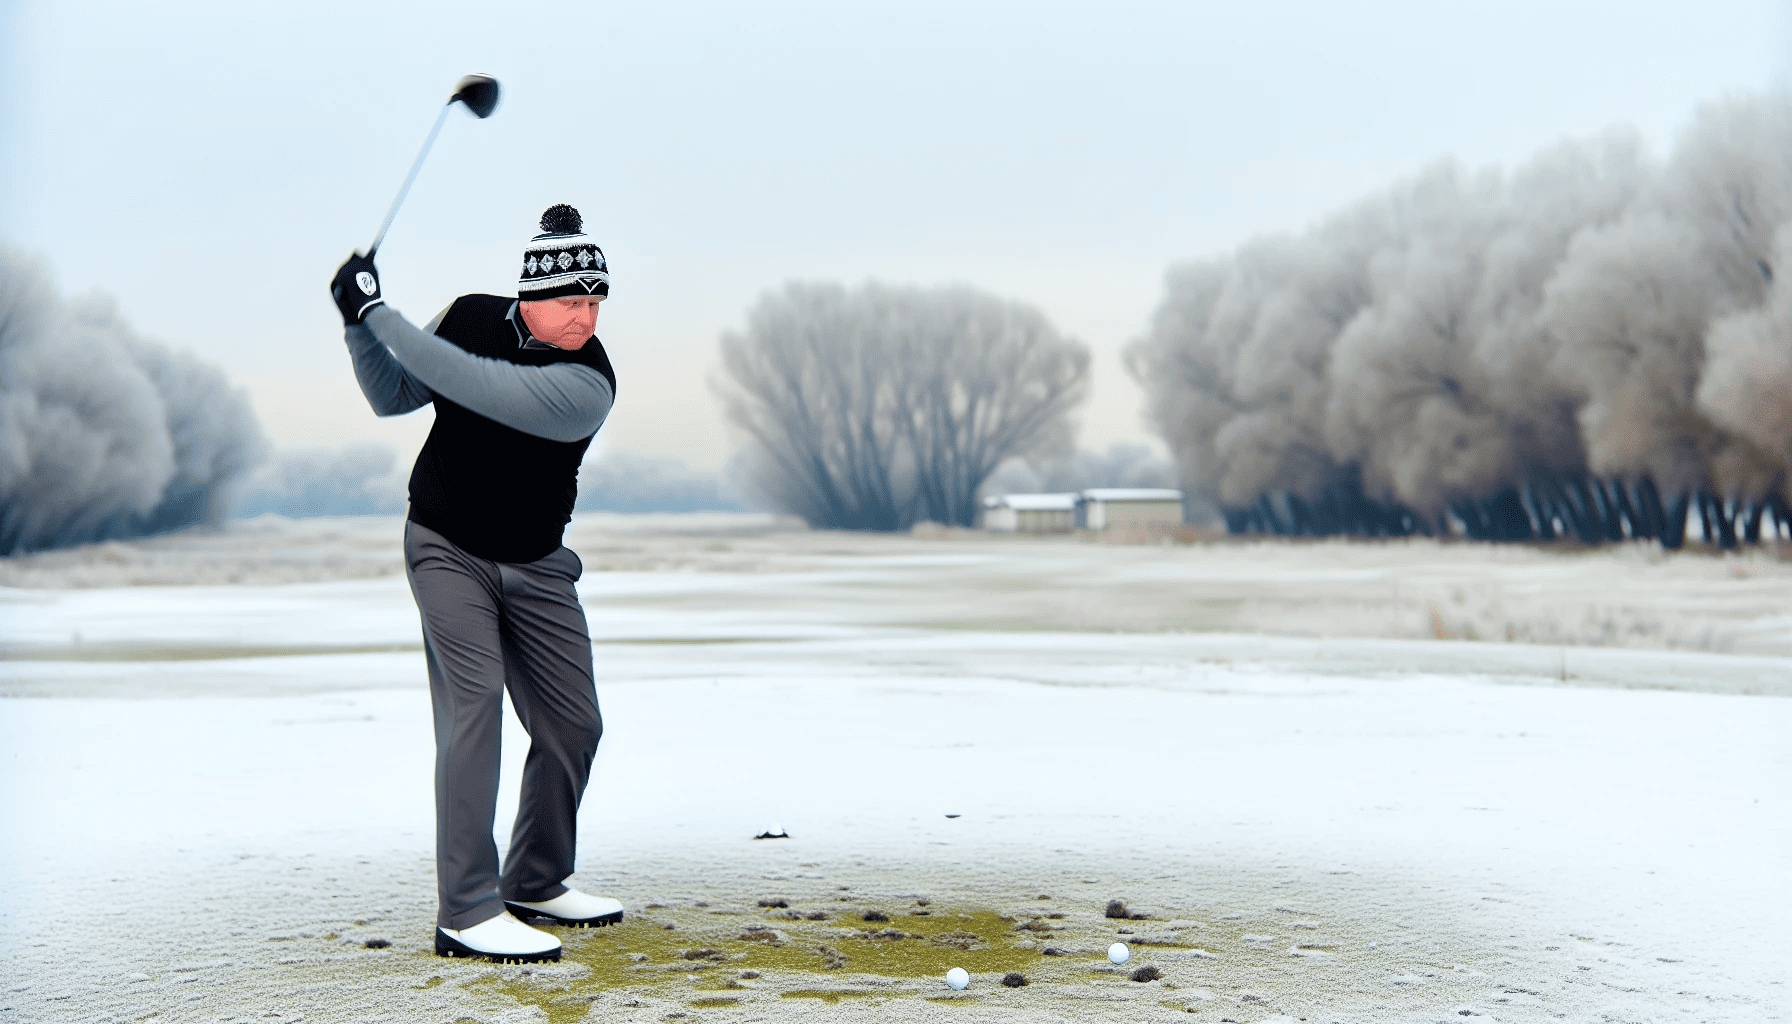 Top Picks: Best Golf Ball for Cold Weather Play in 2023